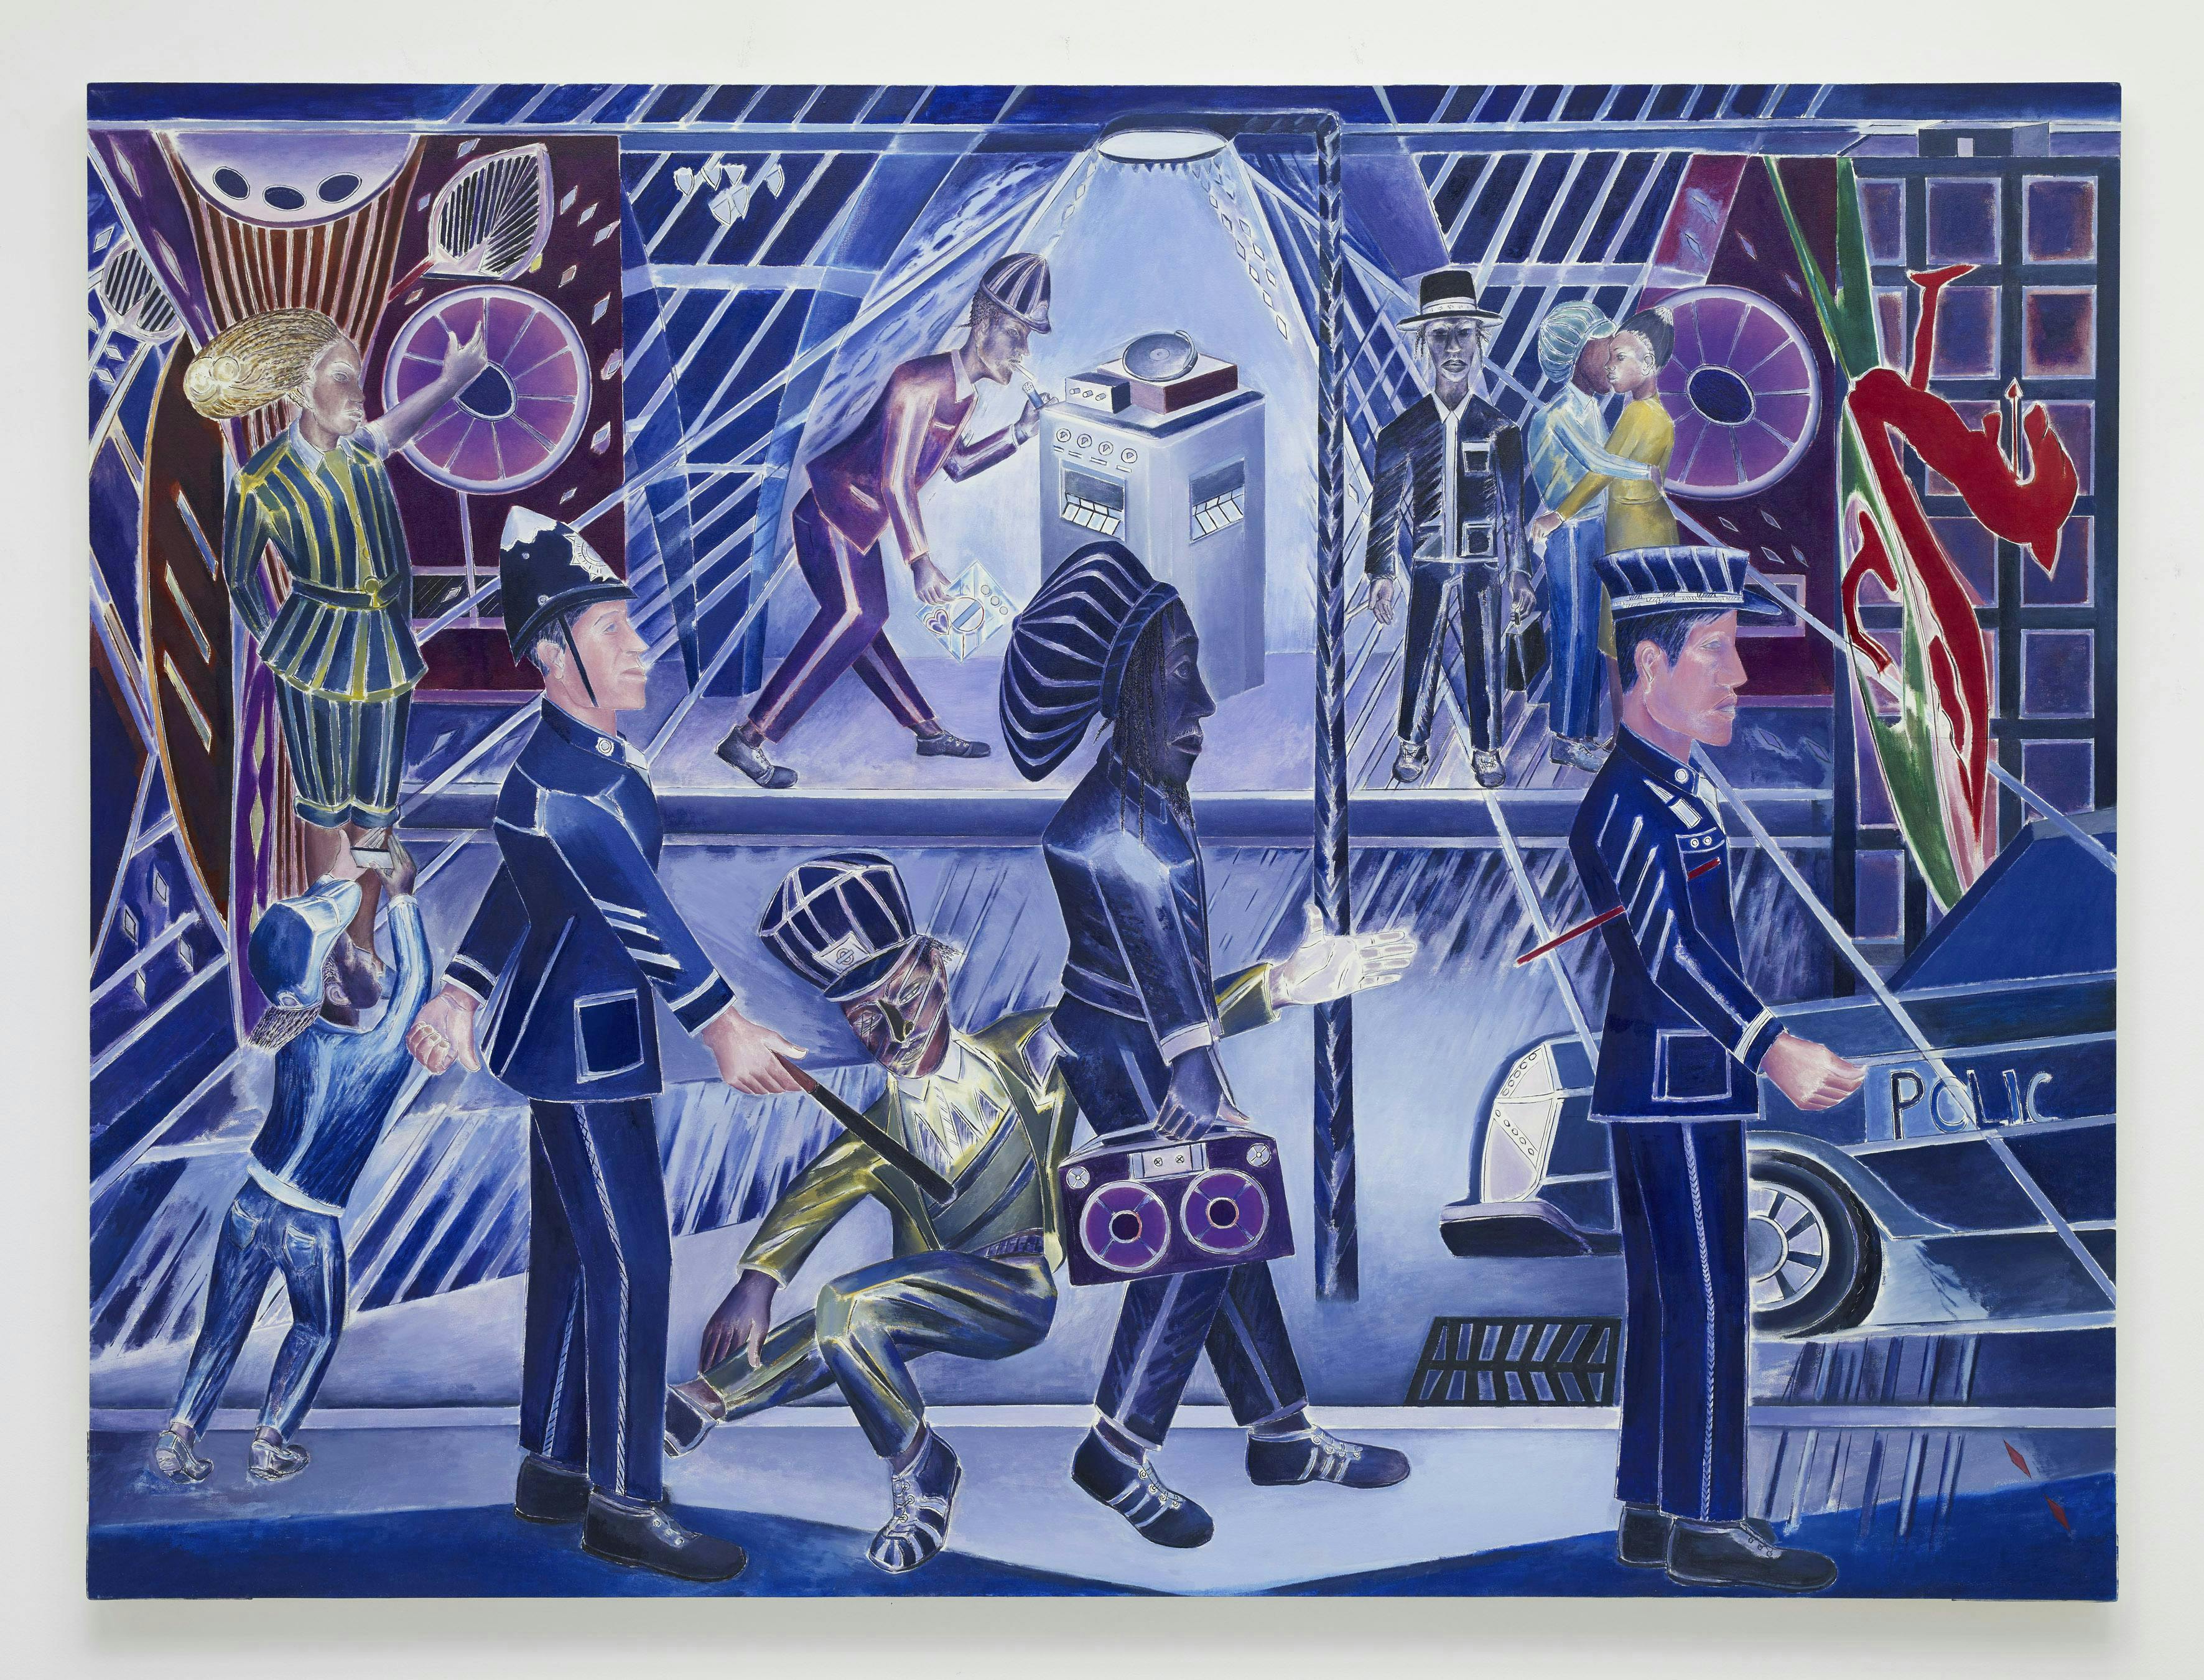 Painting showing police violence in a night club by Denzil Forrester.